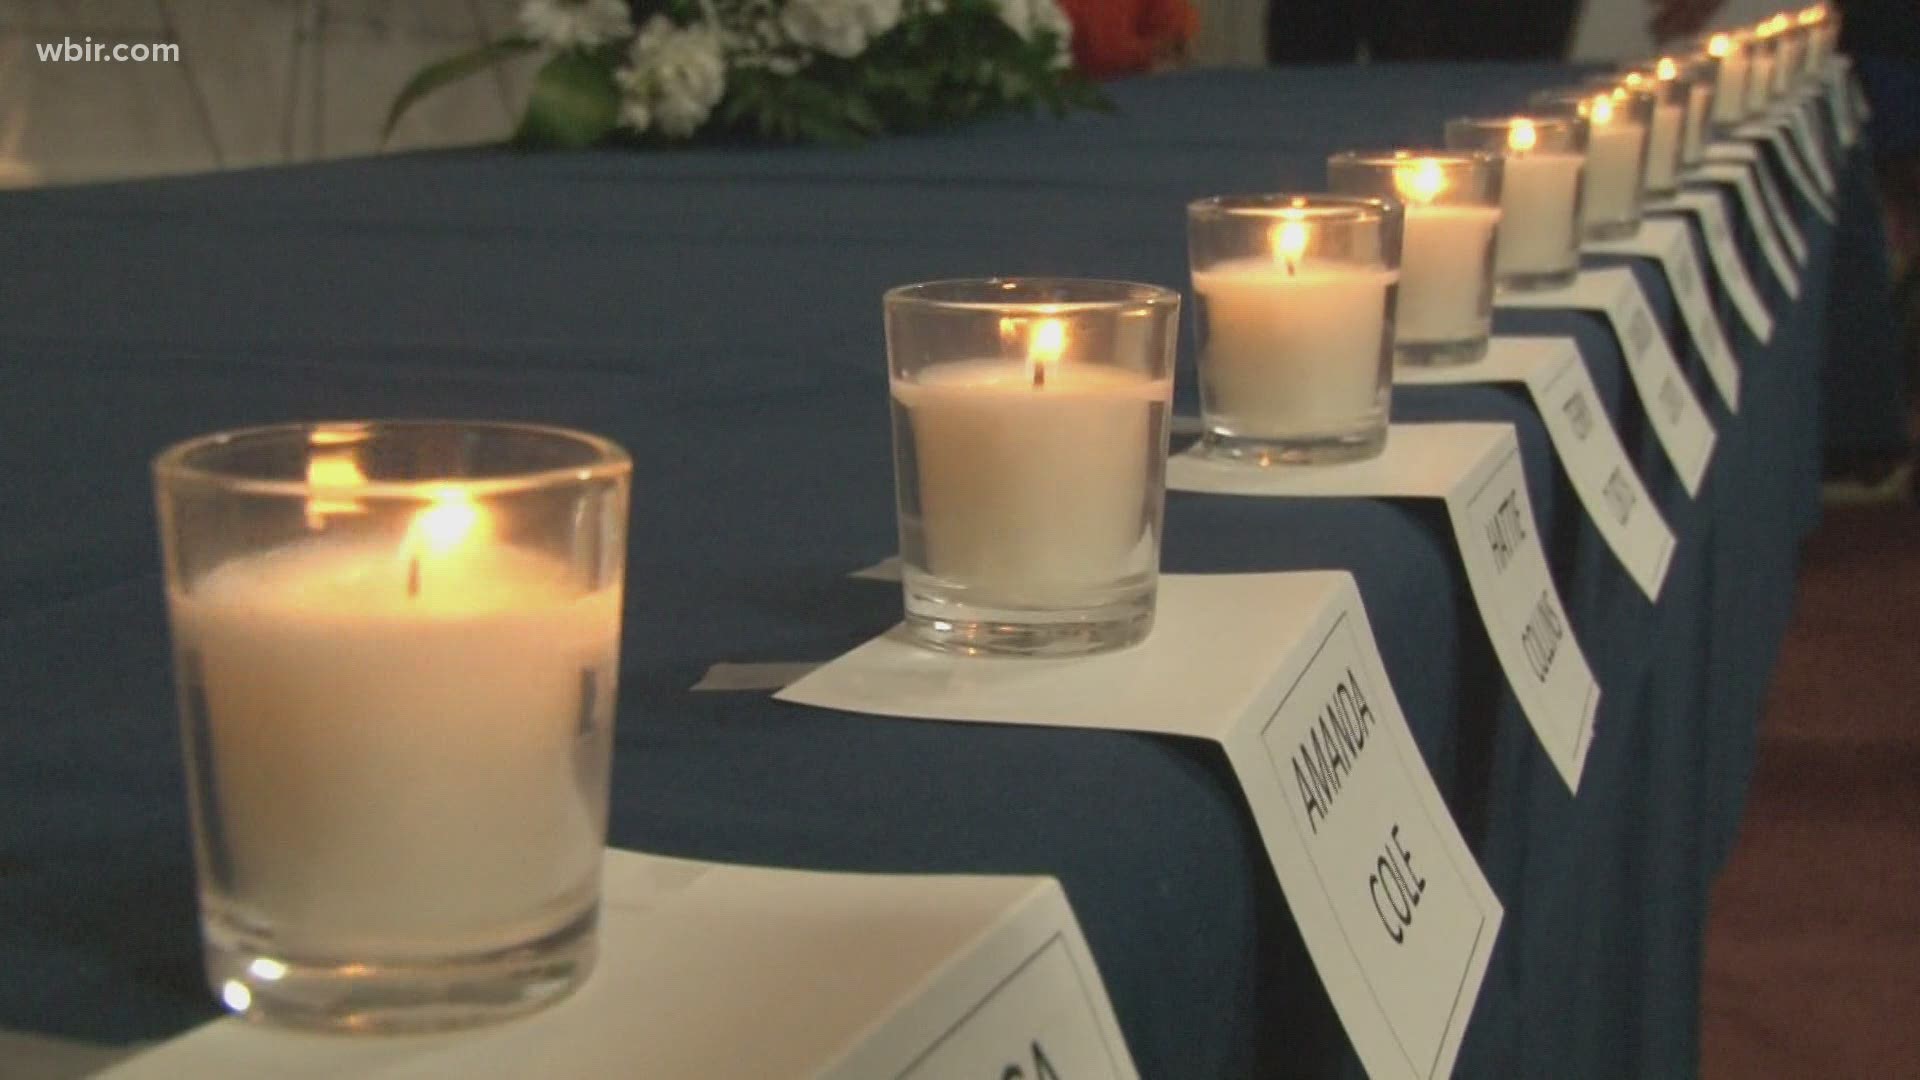 Families of Middle Tennessee tornado victims came together in one room Wednesday night, remembering the ones they lost to the tragedy.